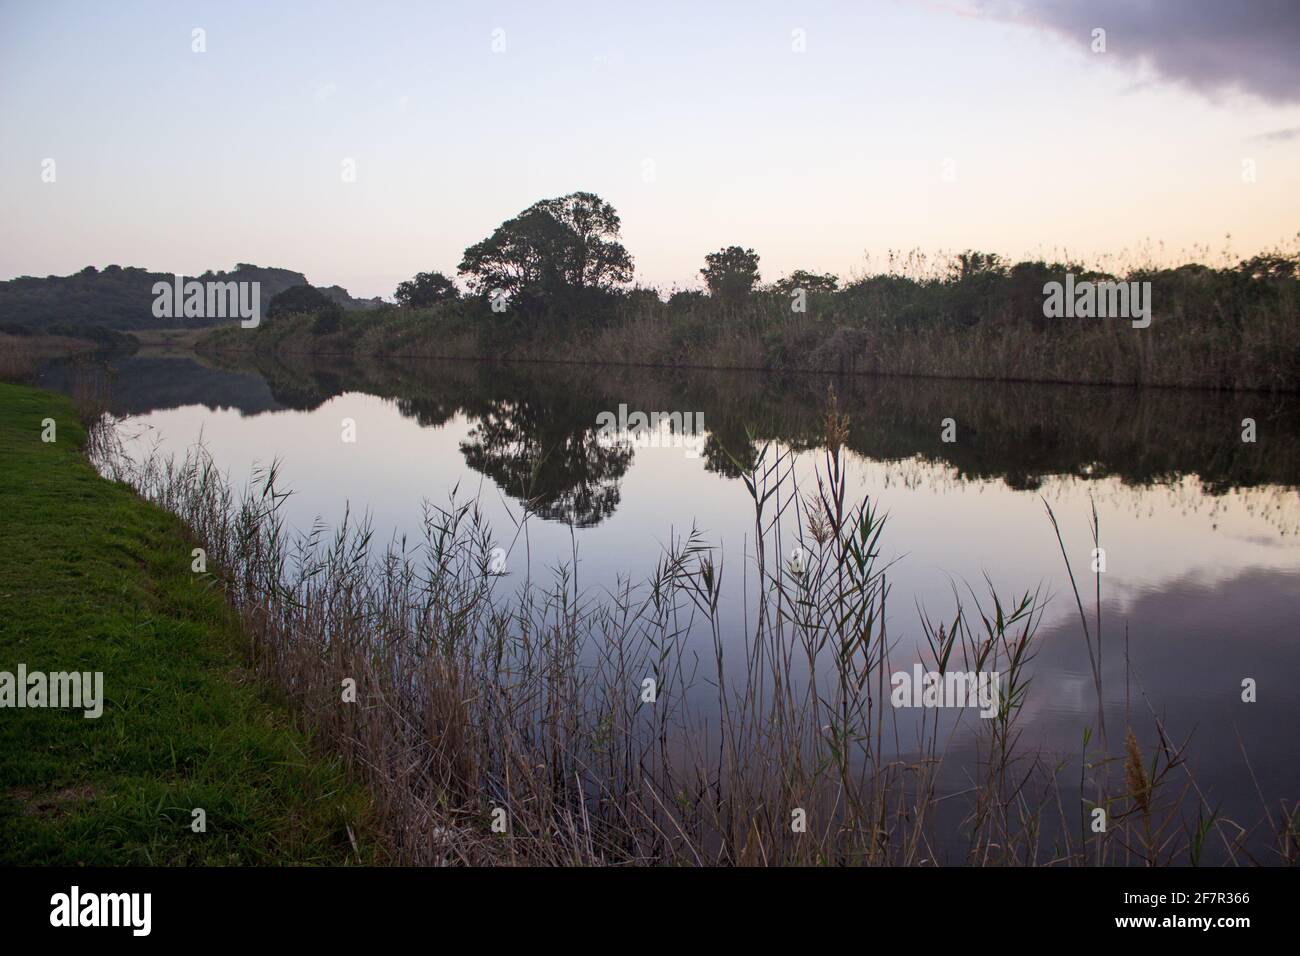 Silhouettes of trees and other riverine vegetation reflecting in the calm water of the Touw River, South Africa in the early evening Stock Photo